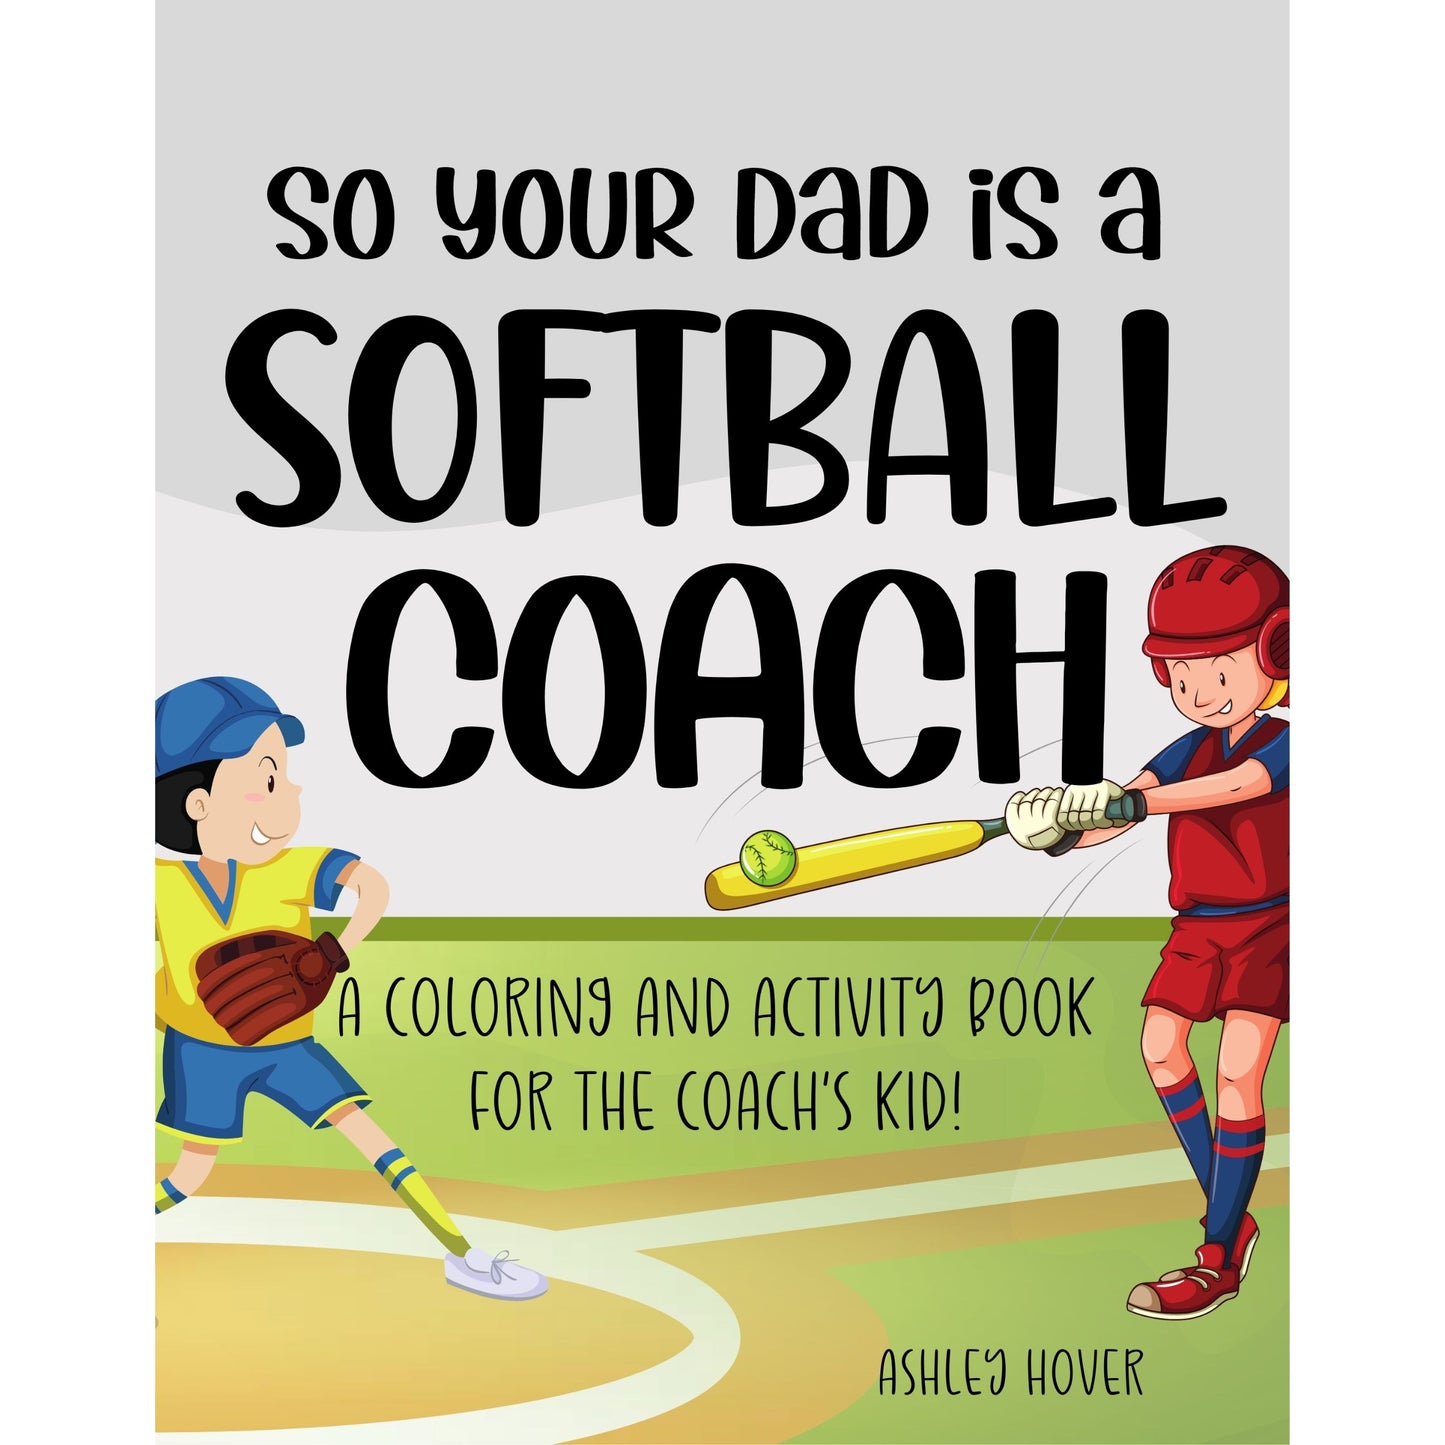 So Your Dad Is A Softball Coach: A Coloring and Activity Book for the Coach's Kid